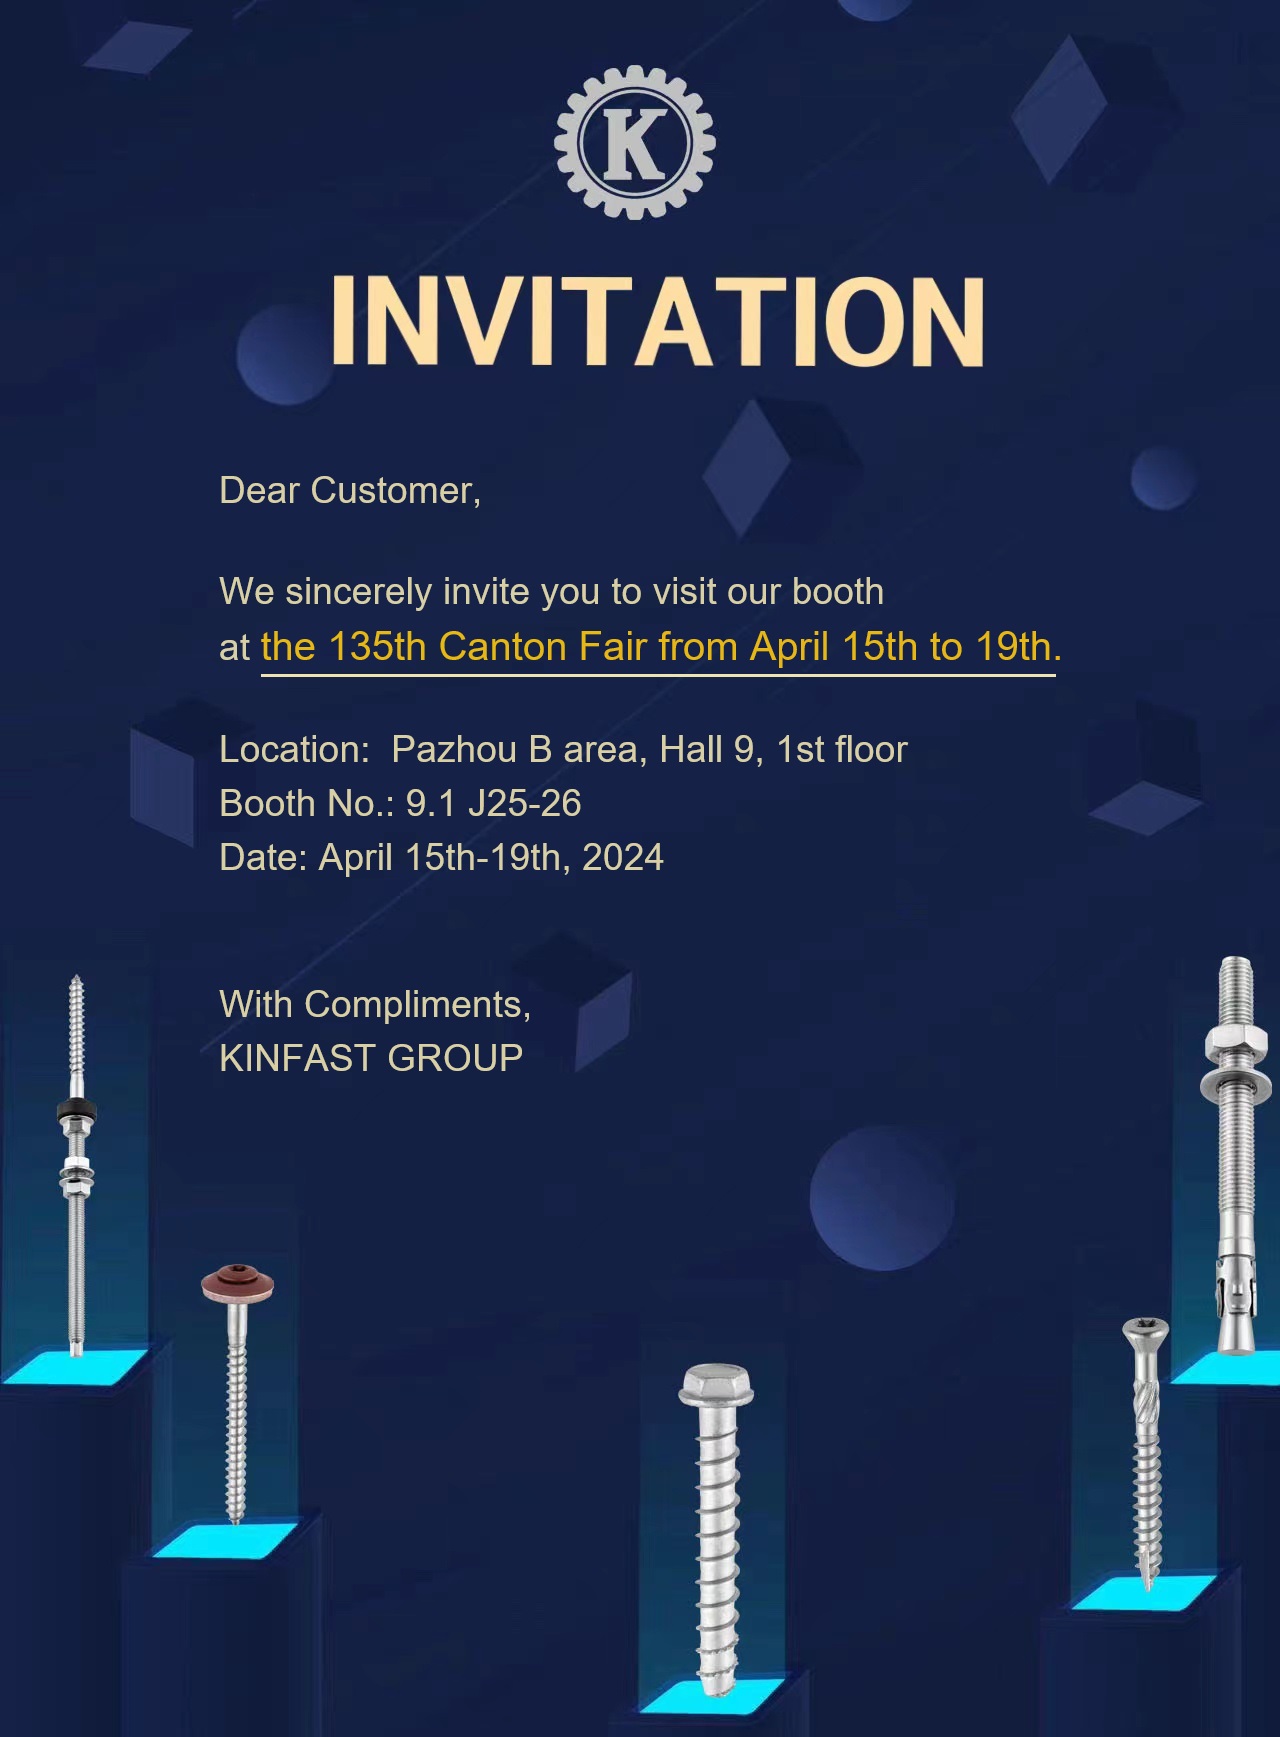 Welcome to visit us at the 135th Canton Fair